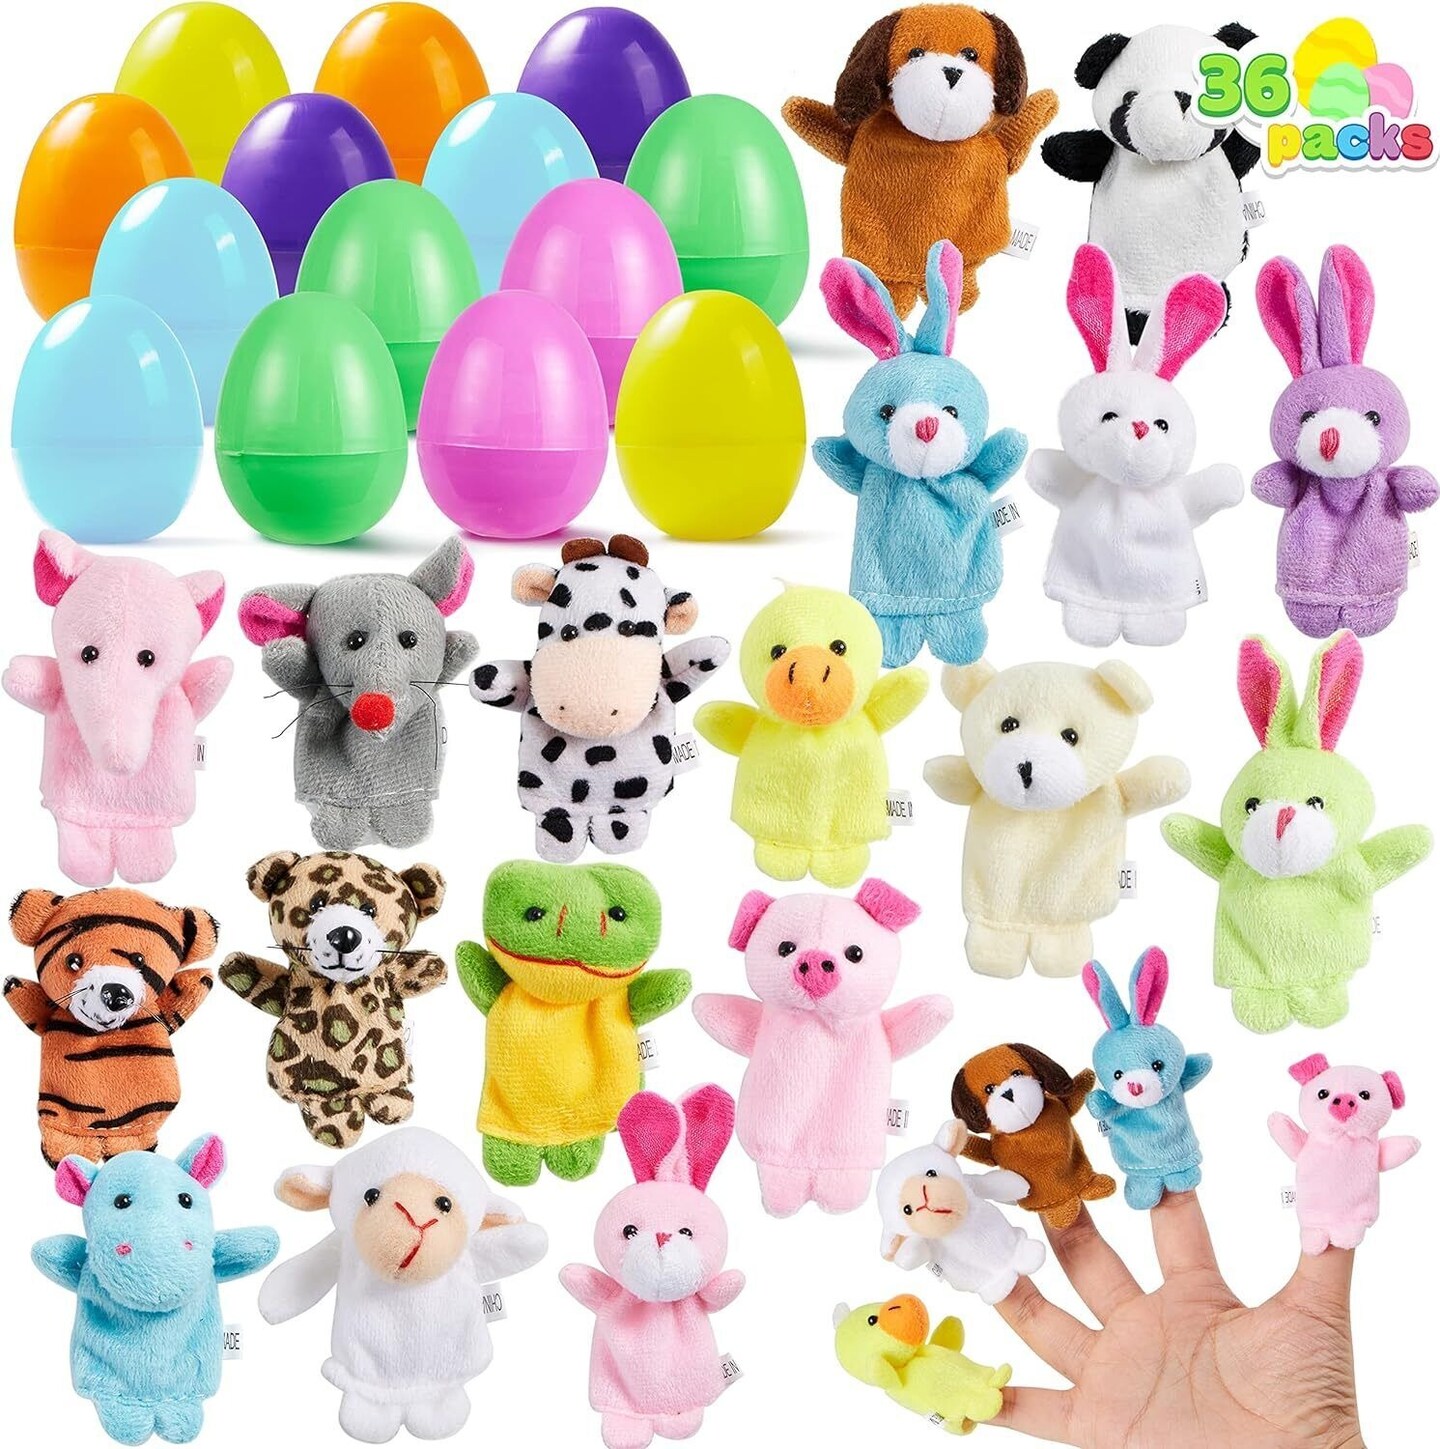 36 Pcs Pre-Filled Easter Eggs with Animal Finger Puppets for Toddlers and Kids